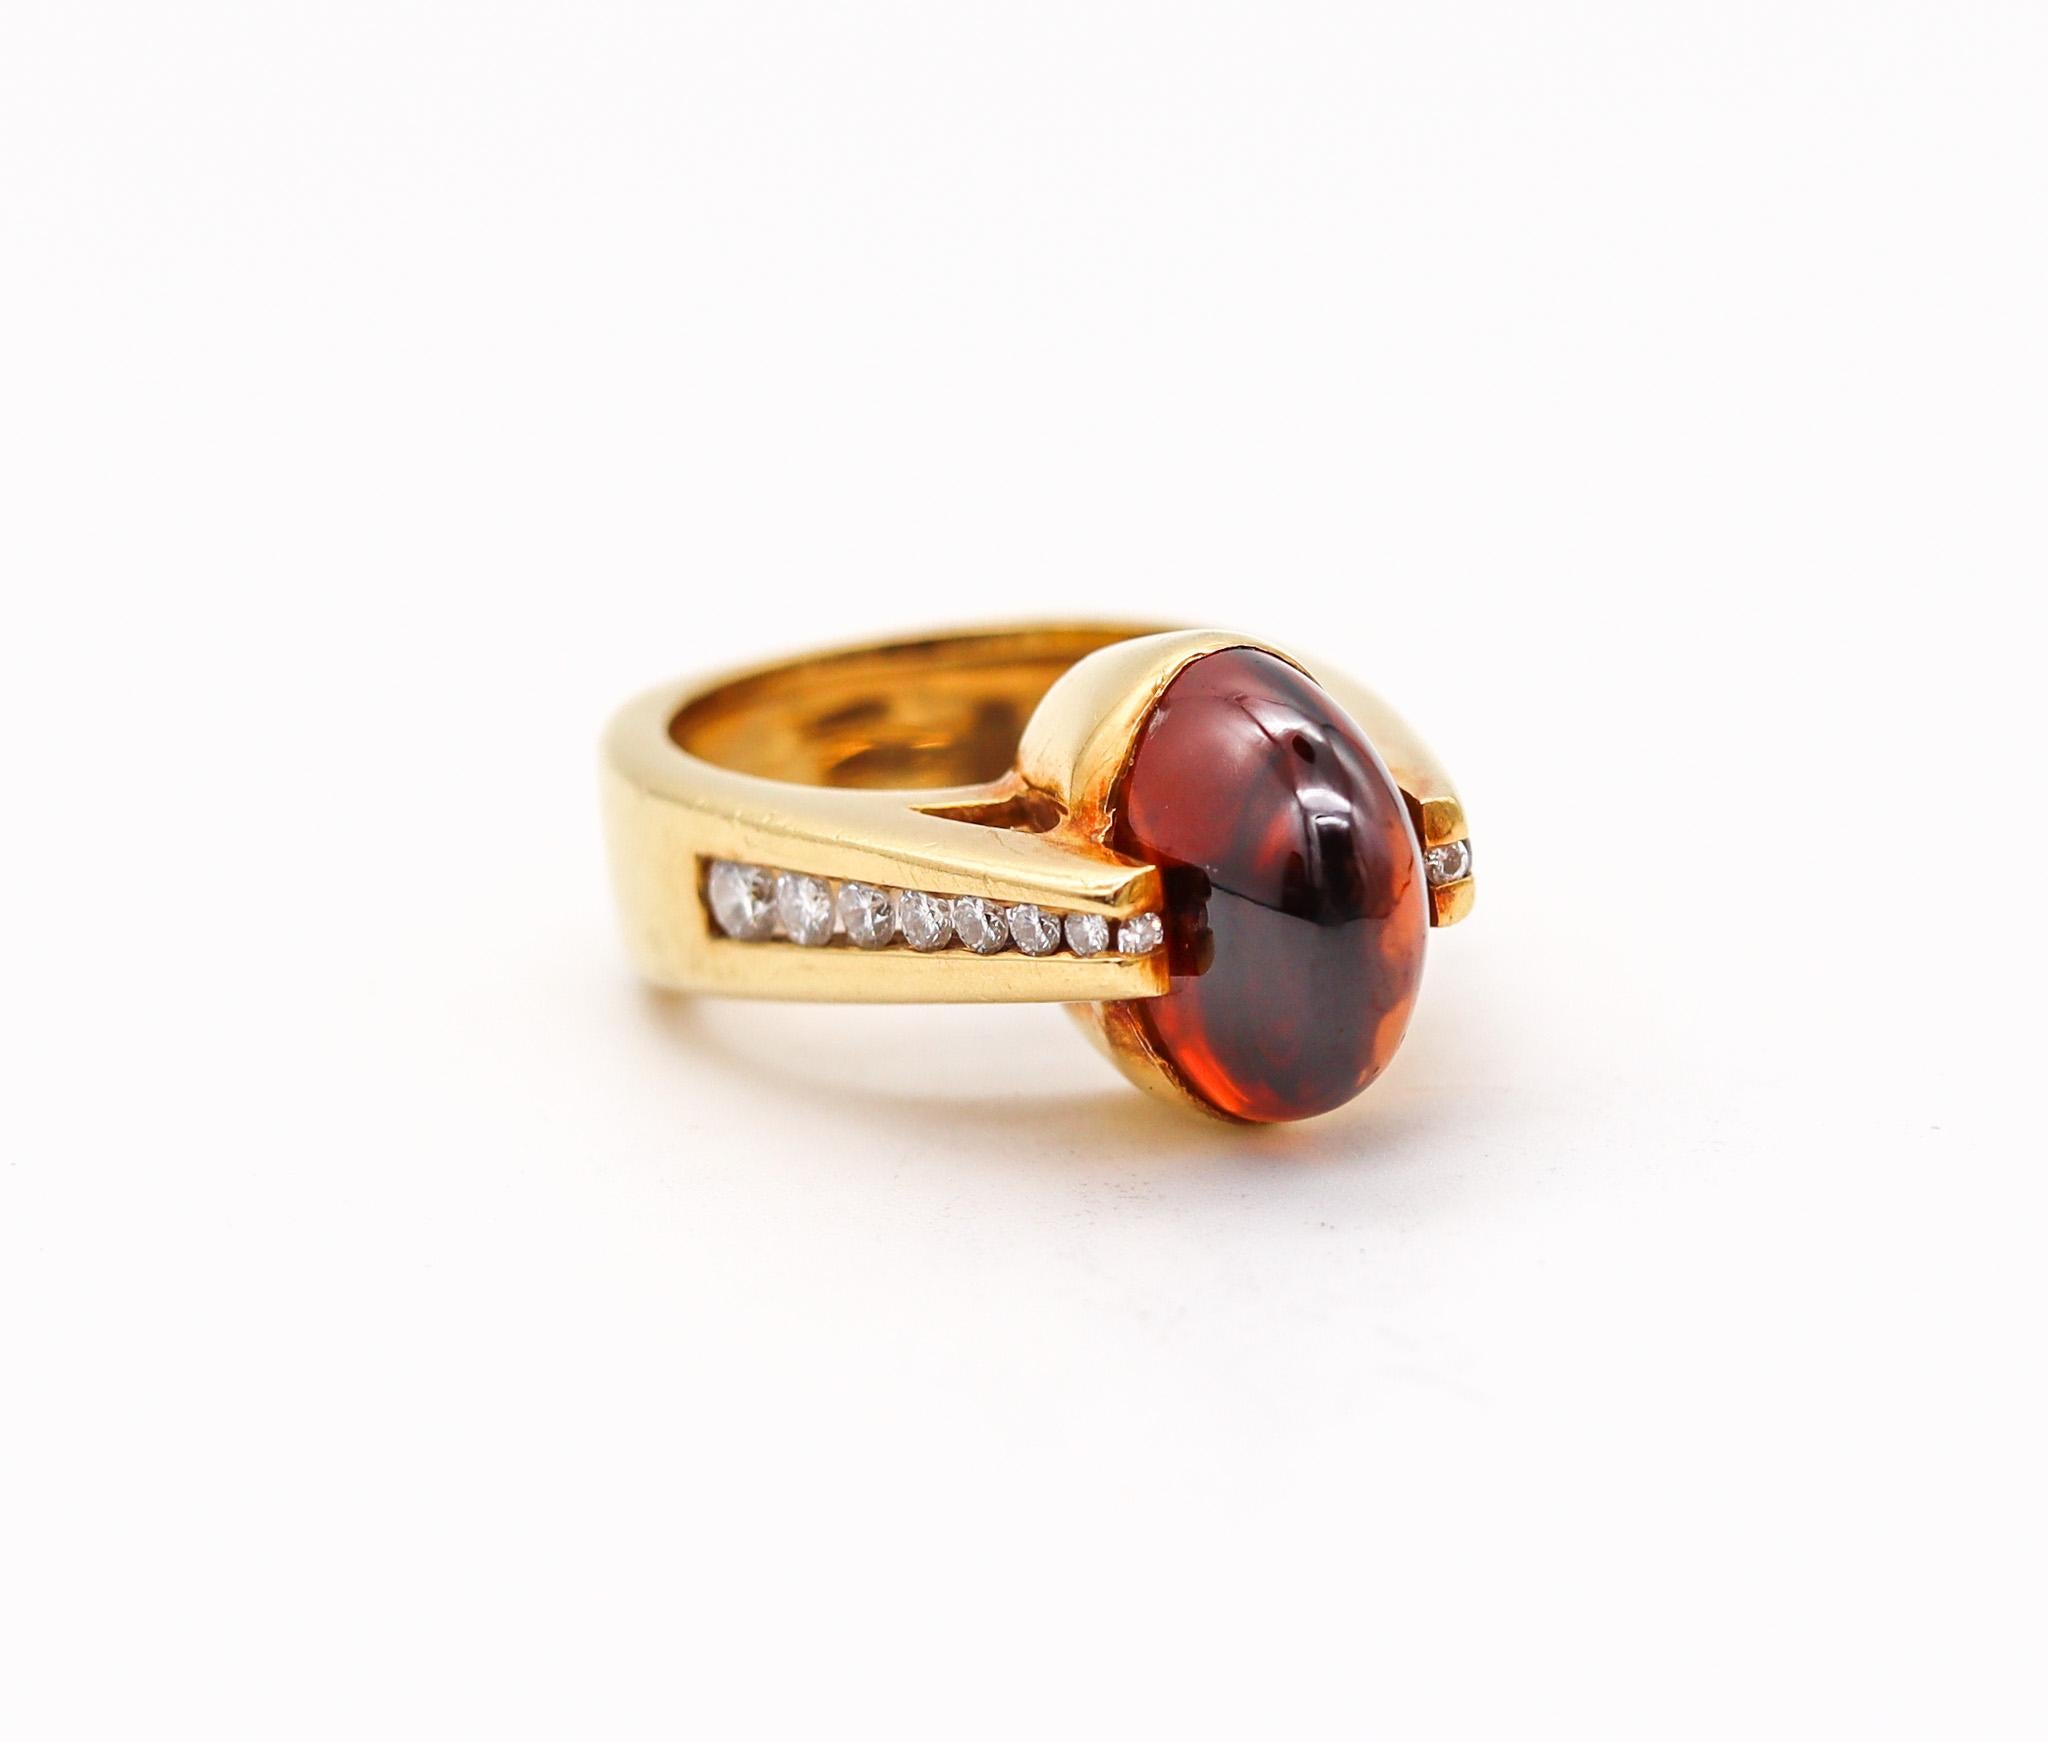 Sculptural cocktail ring with Santa Ana Madeira Citrine.

Gorgeous designer's cocktail ring carefully crafted with geometric architectural patterns in solid yellow gold of 18 karats with high polished finish. It is embellished with a great selection